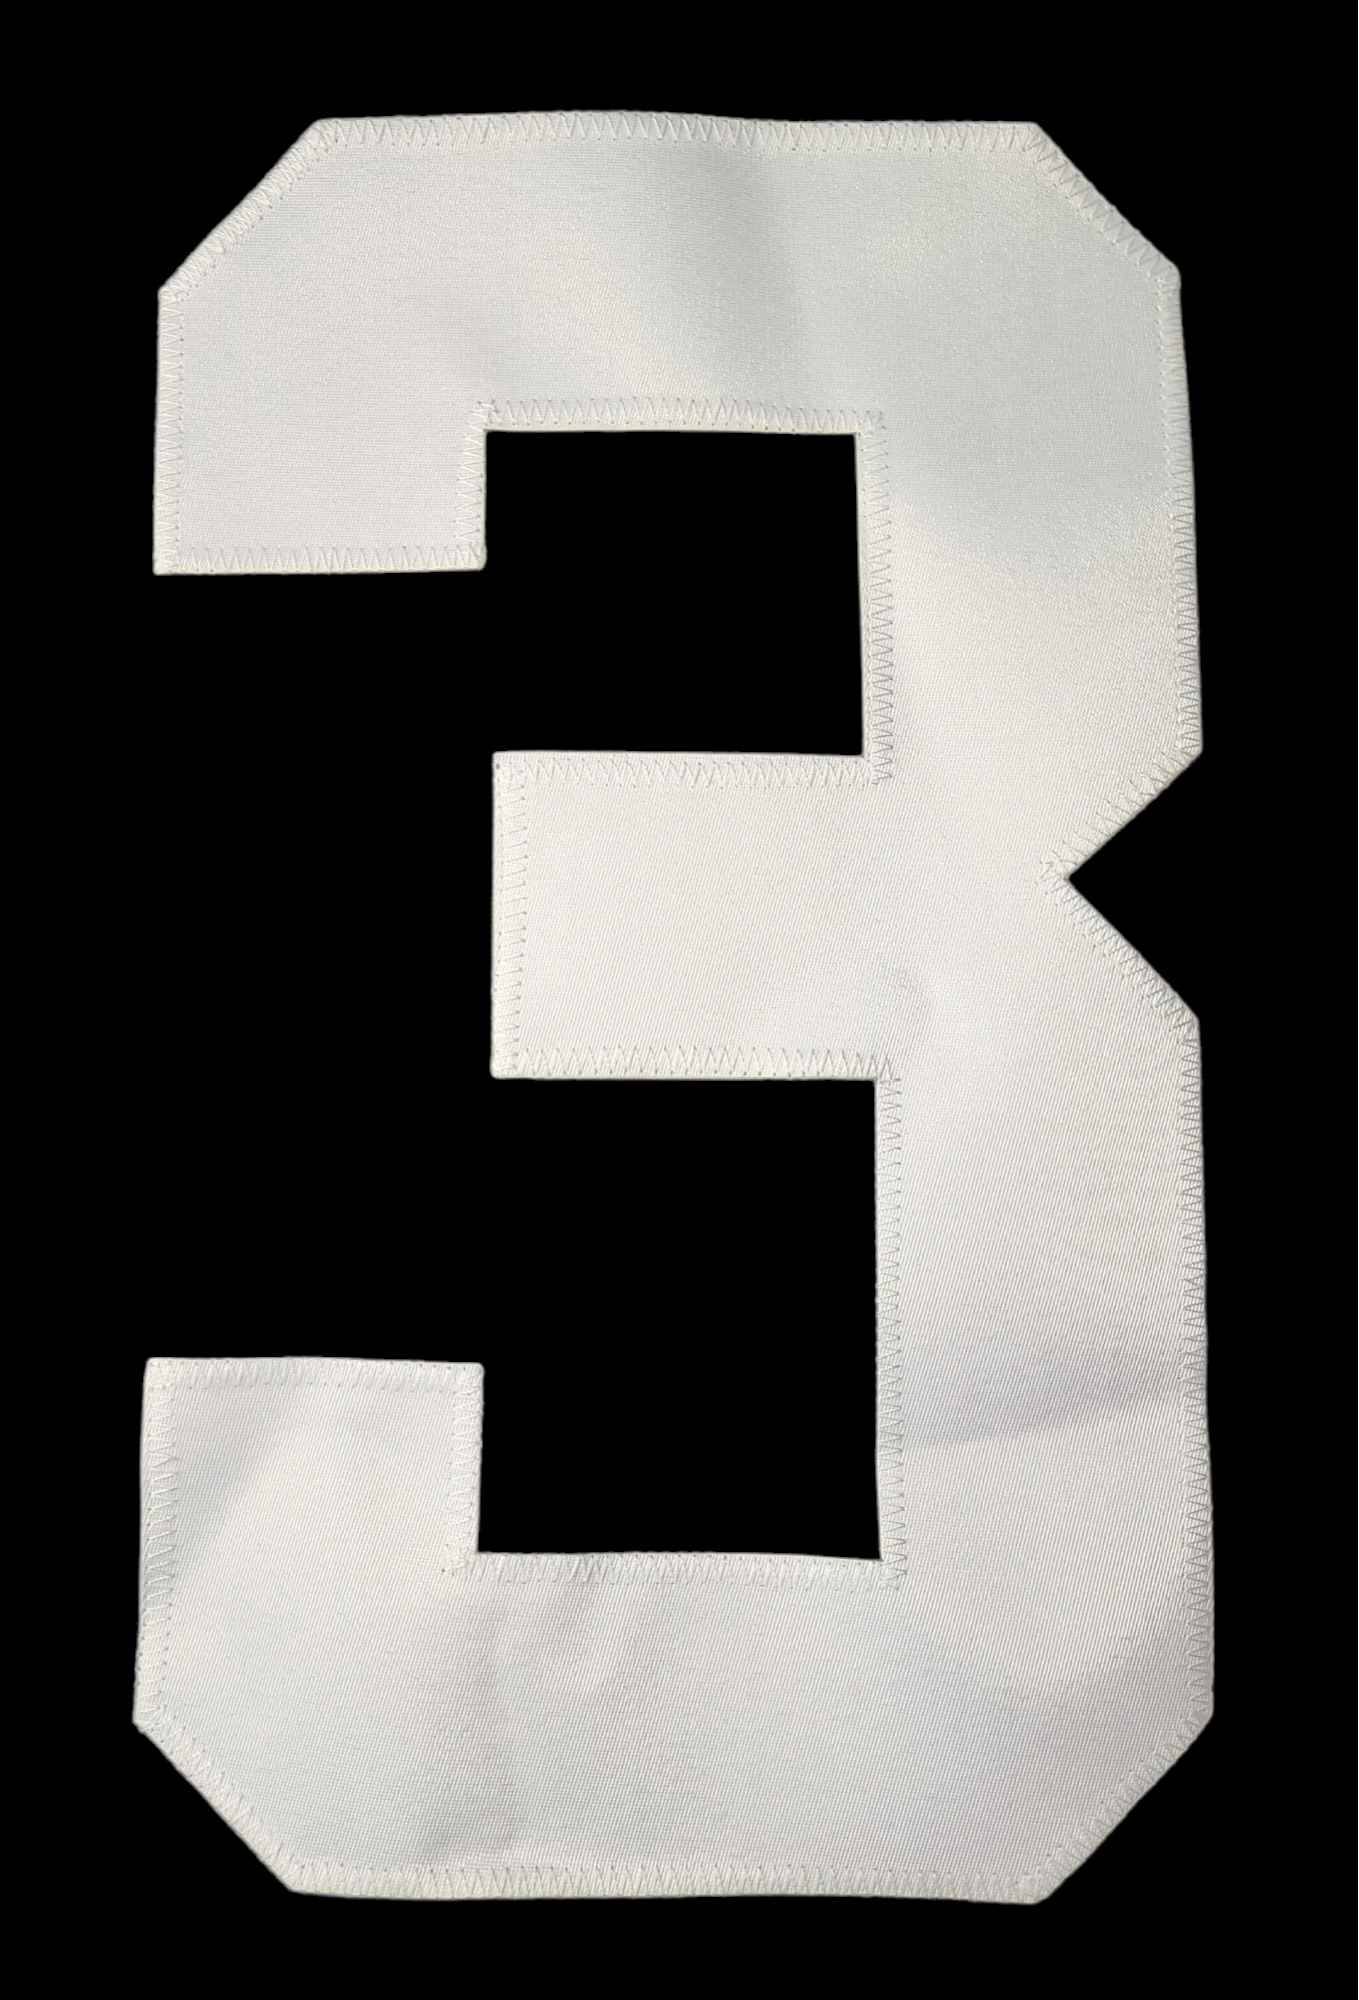 Number Stencil for Athletic Jerseys - 3 - 100pc — Texsource